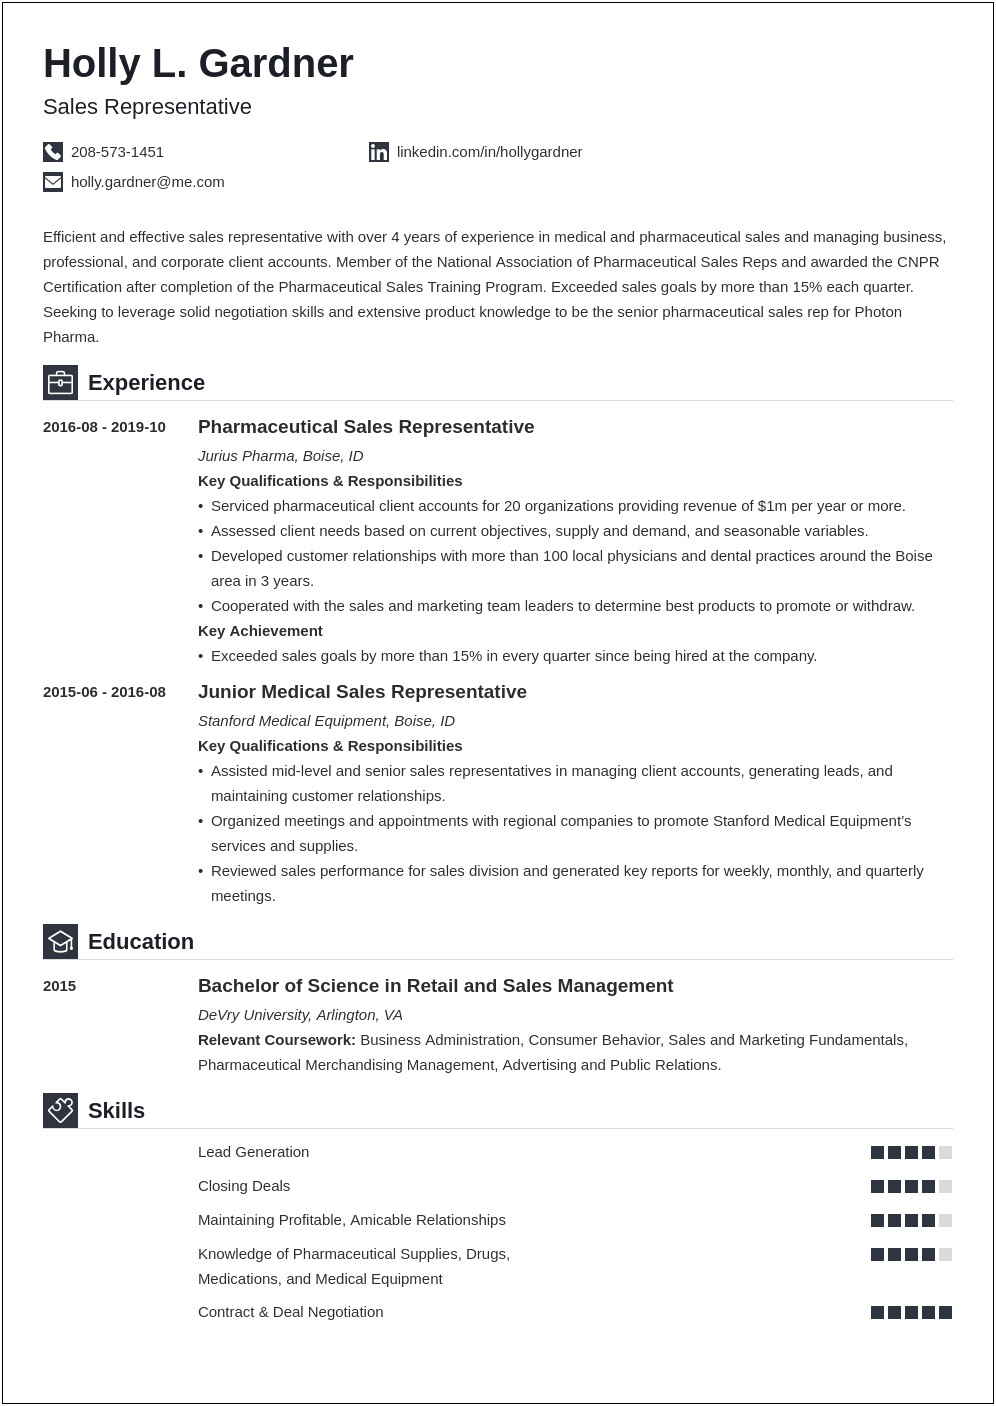 Sample Resume For Area Sales Manager In India